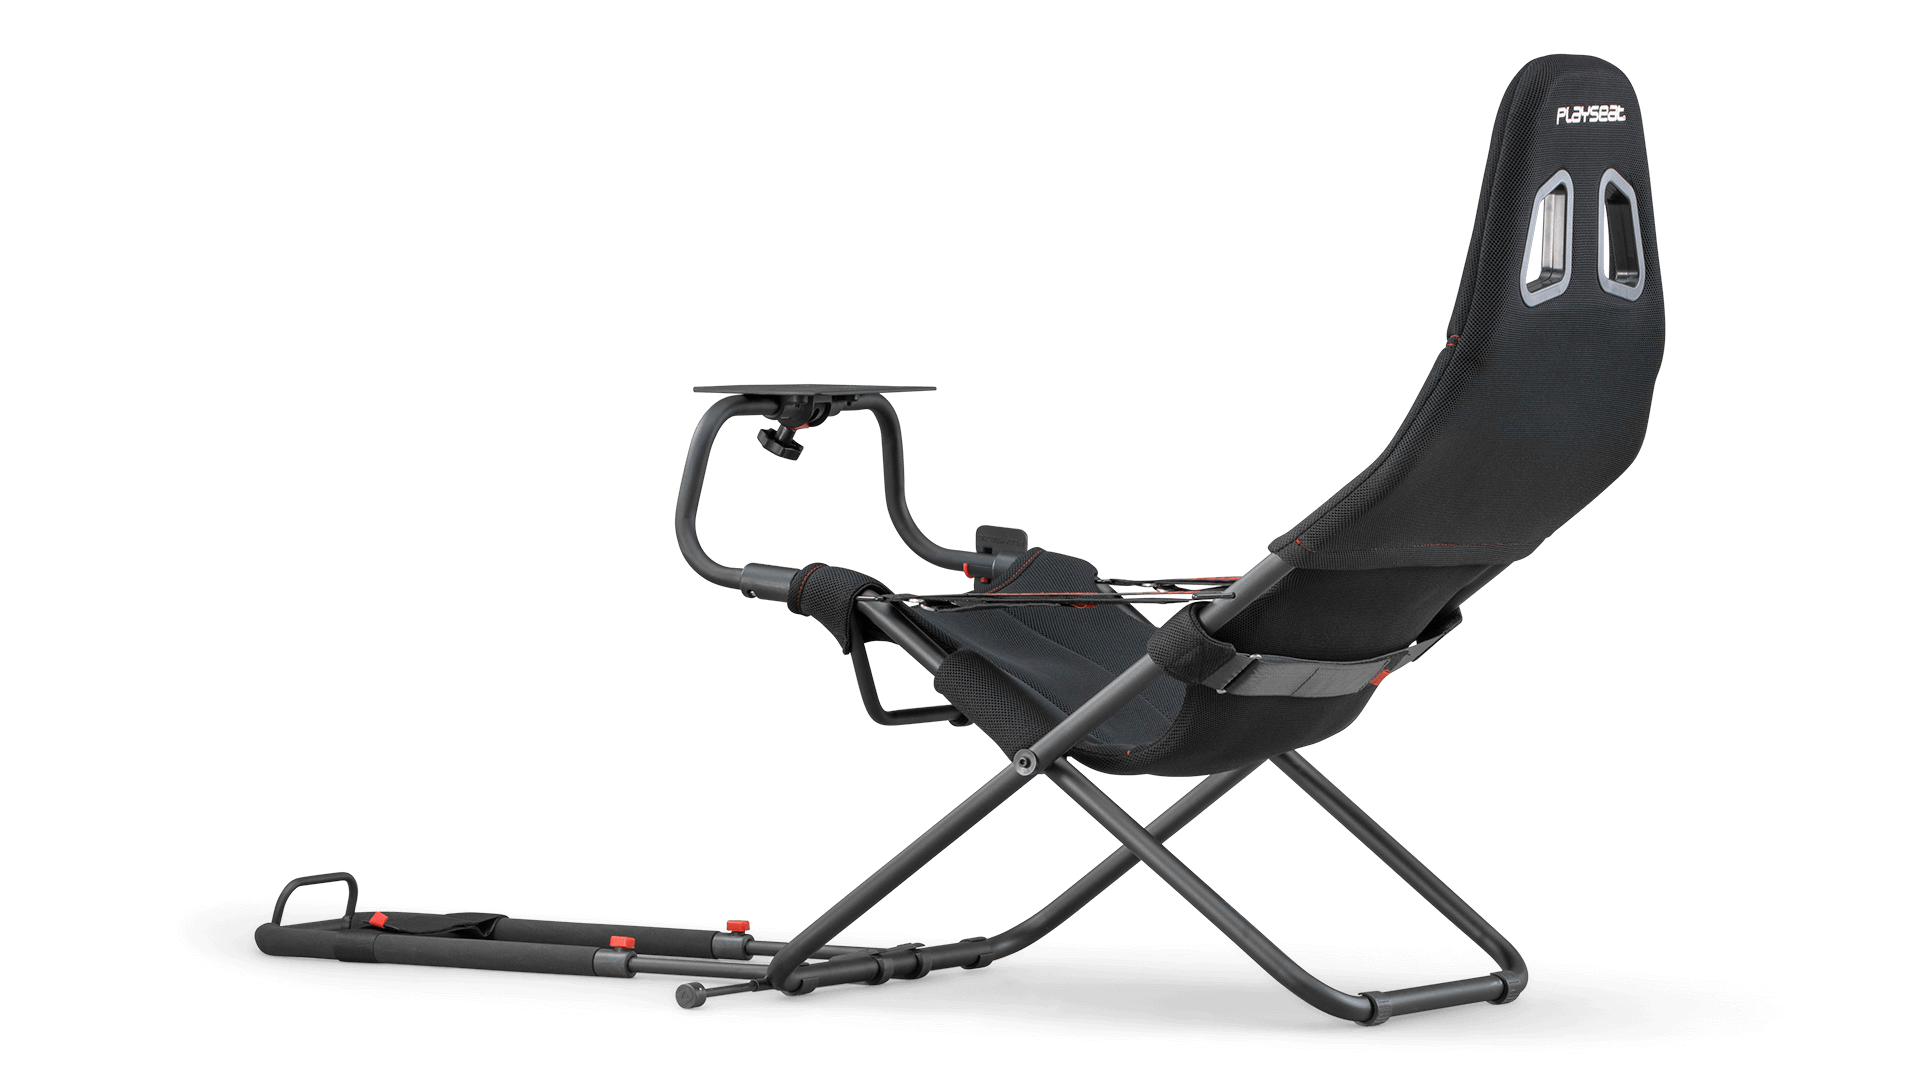 playseat-challenge-black-actifit-racing-seat-back-angle-view-1920x1080-1.png